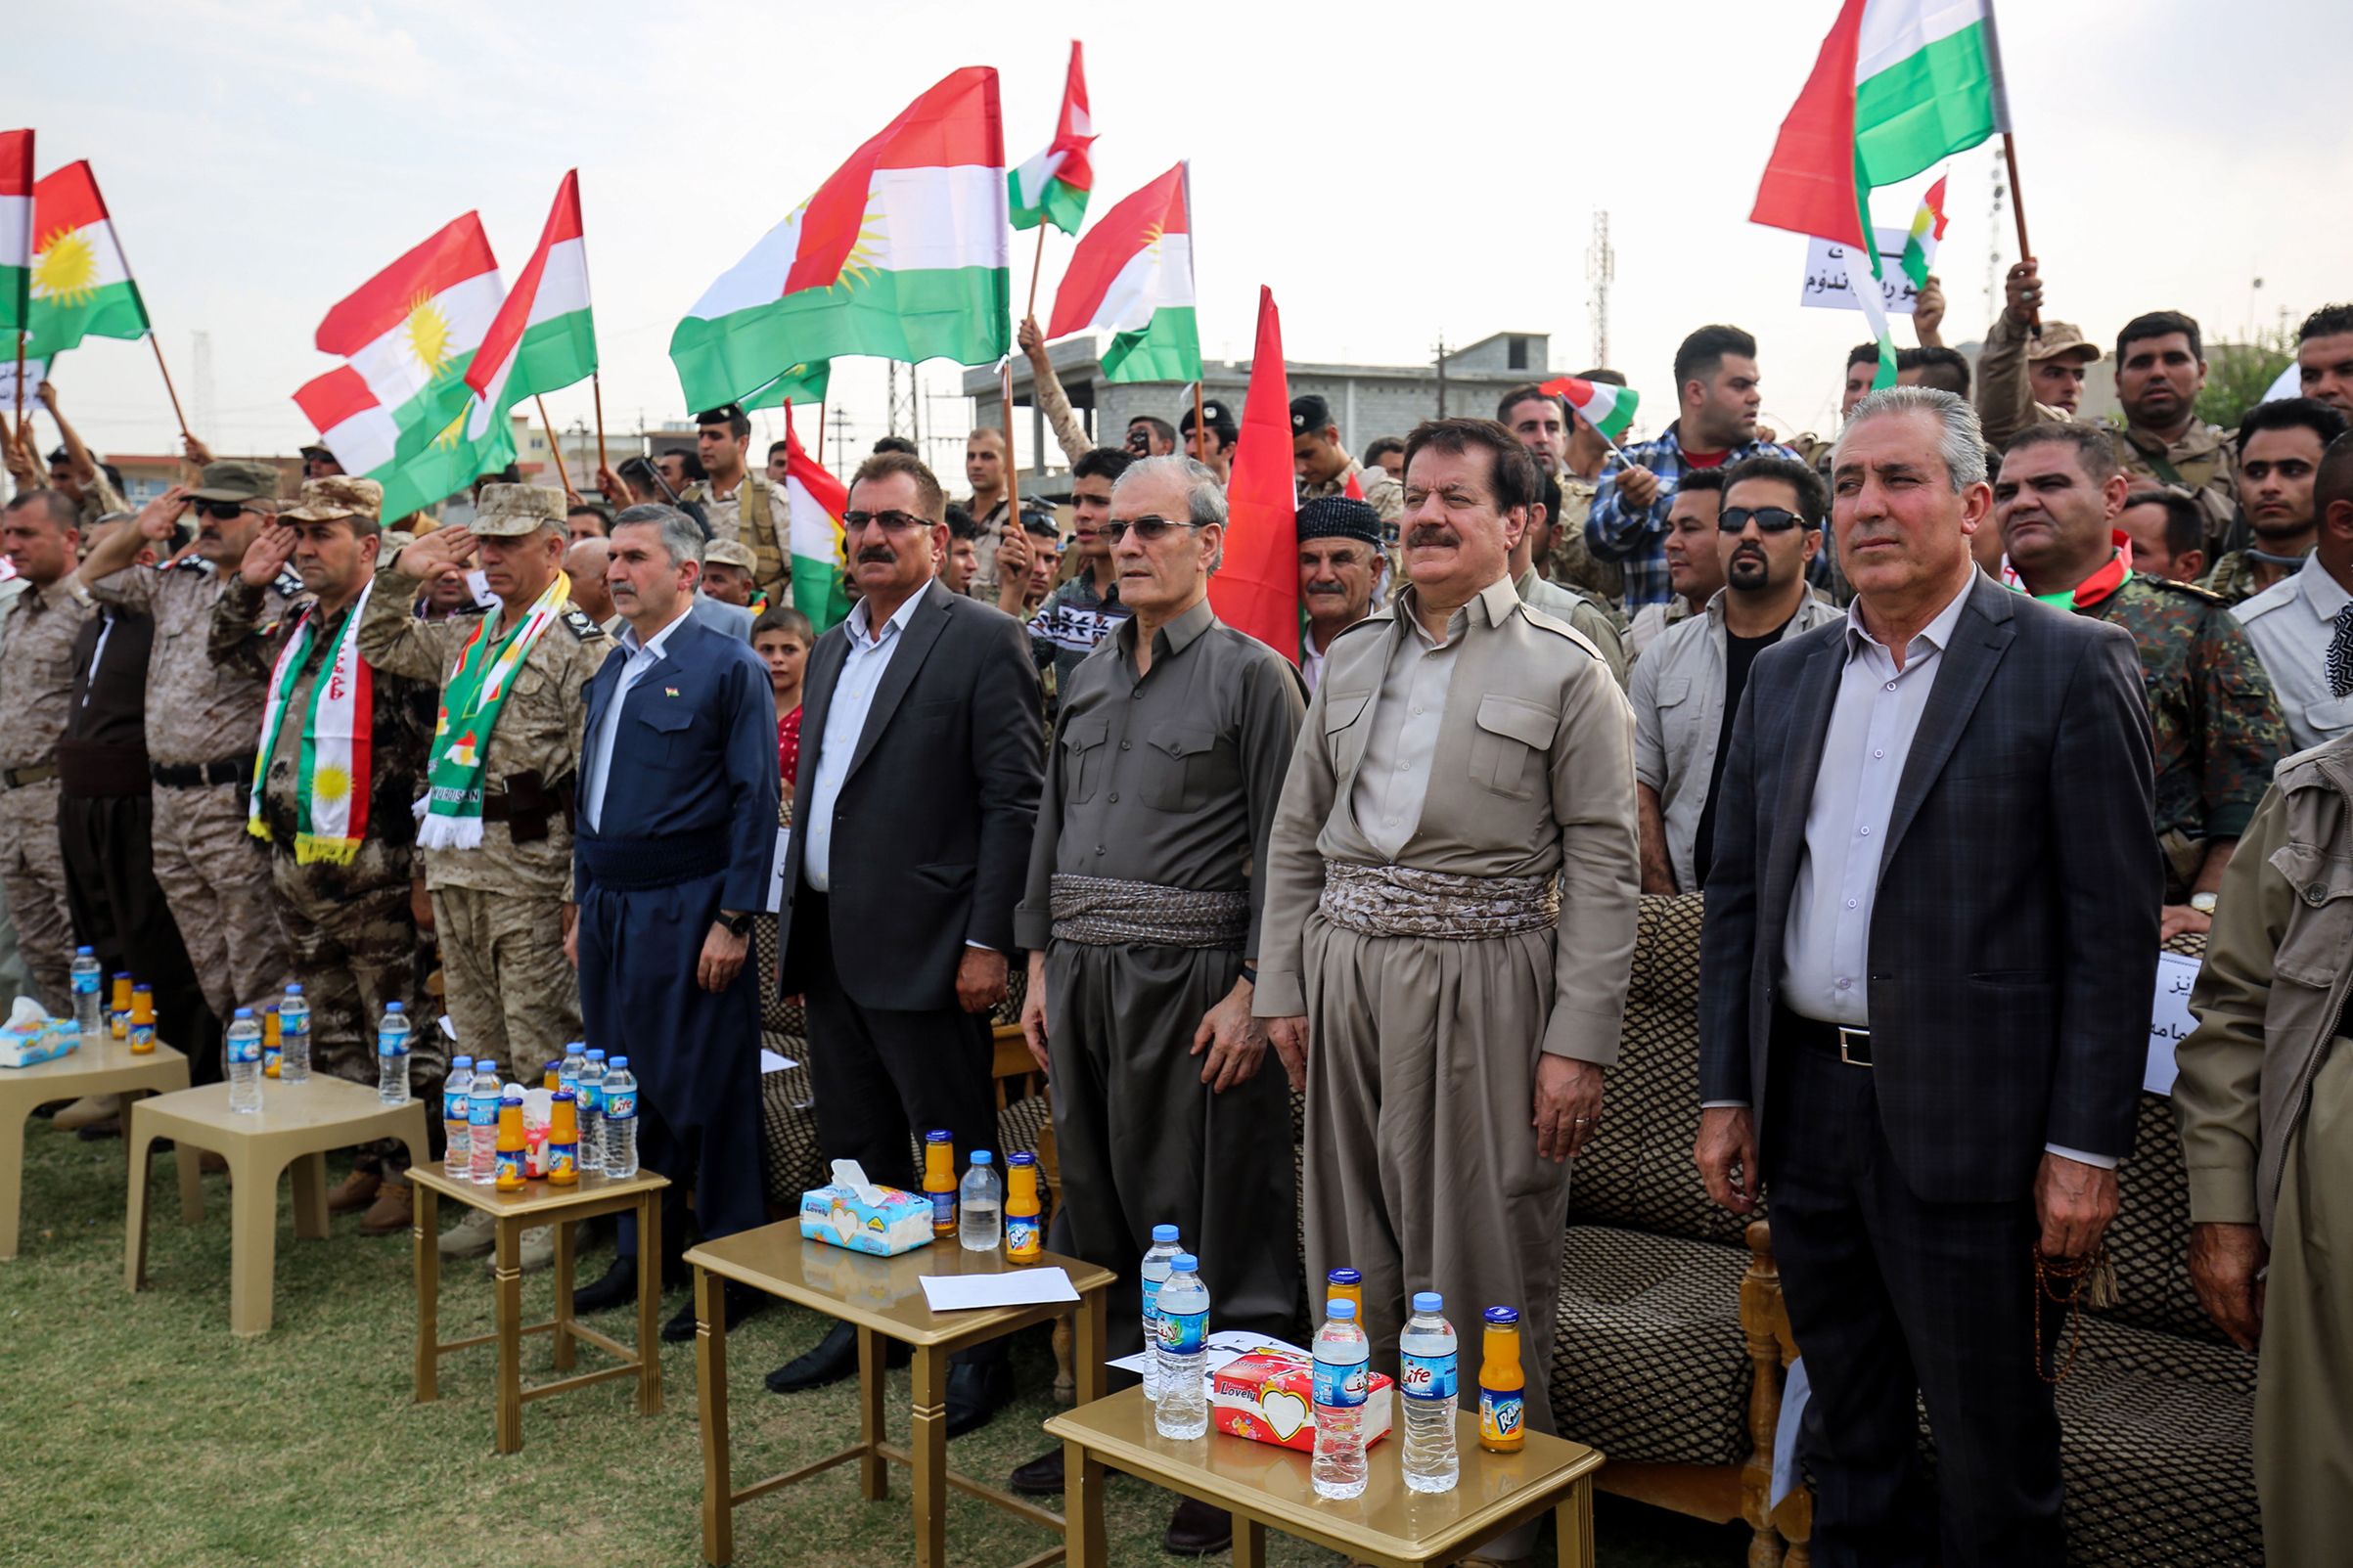 Kirkuk's provincial governor Najim al-Din Karim third from right, who was recently sacked by the Iraqi parliament, attends a rally in support of the upcoming independence referendum in Kirkuk on Sept. 19, 2017 (Marwan Ibrahim—AFP/Getty Images)